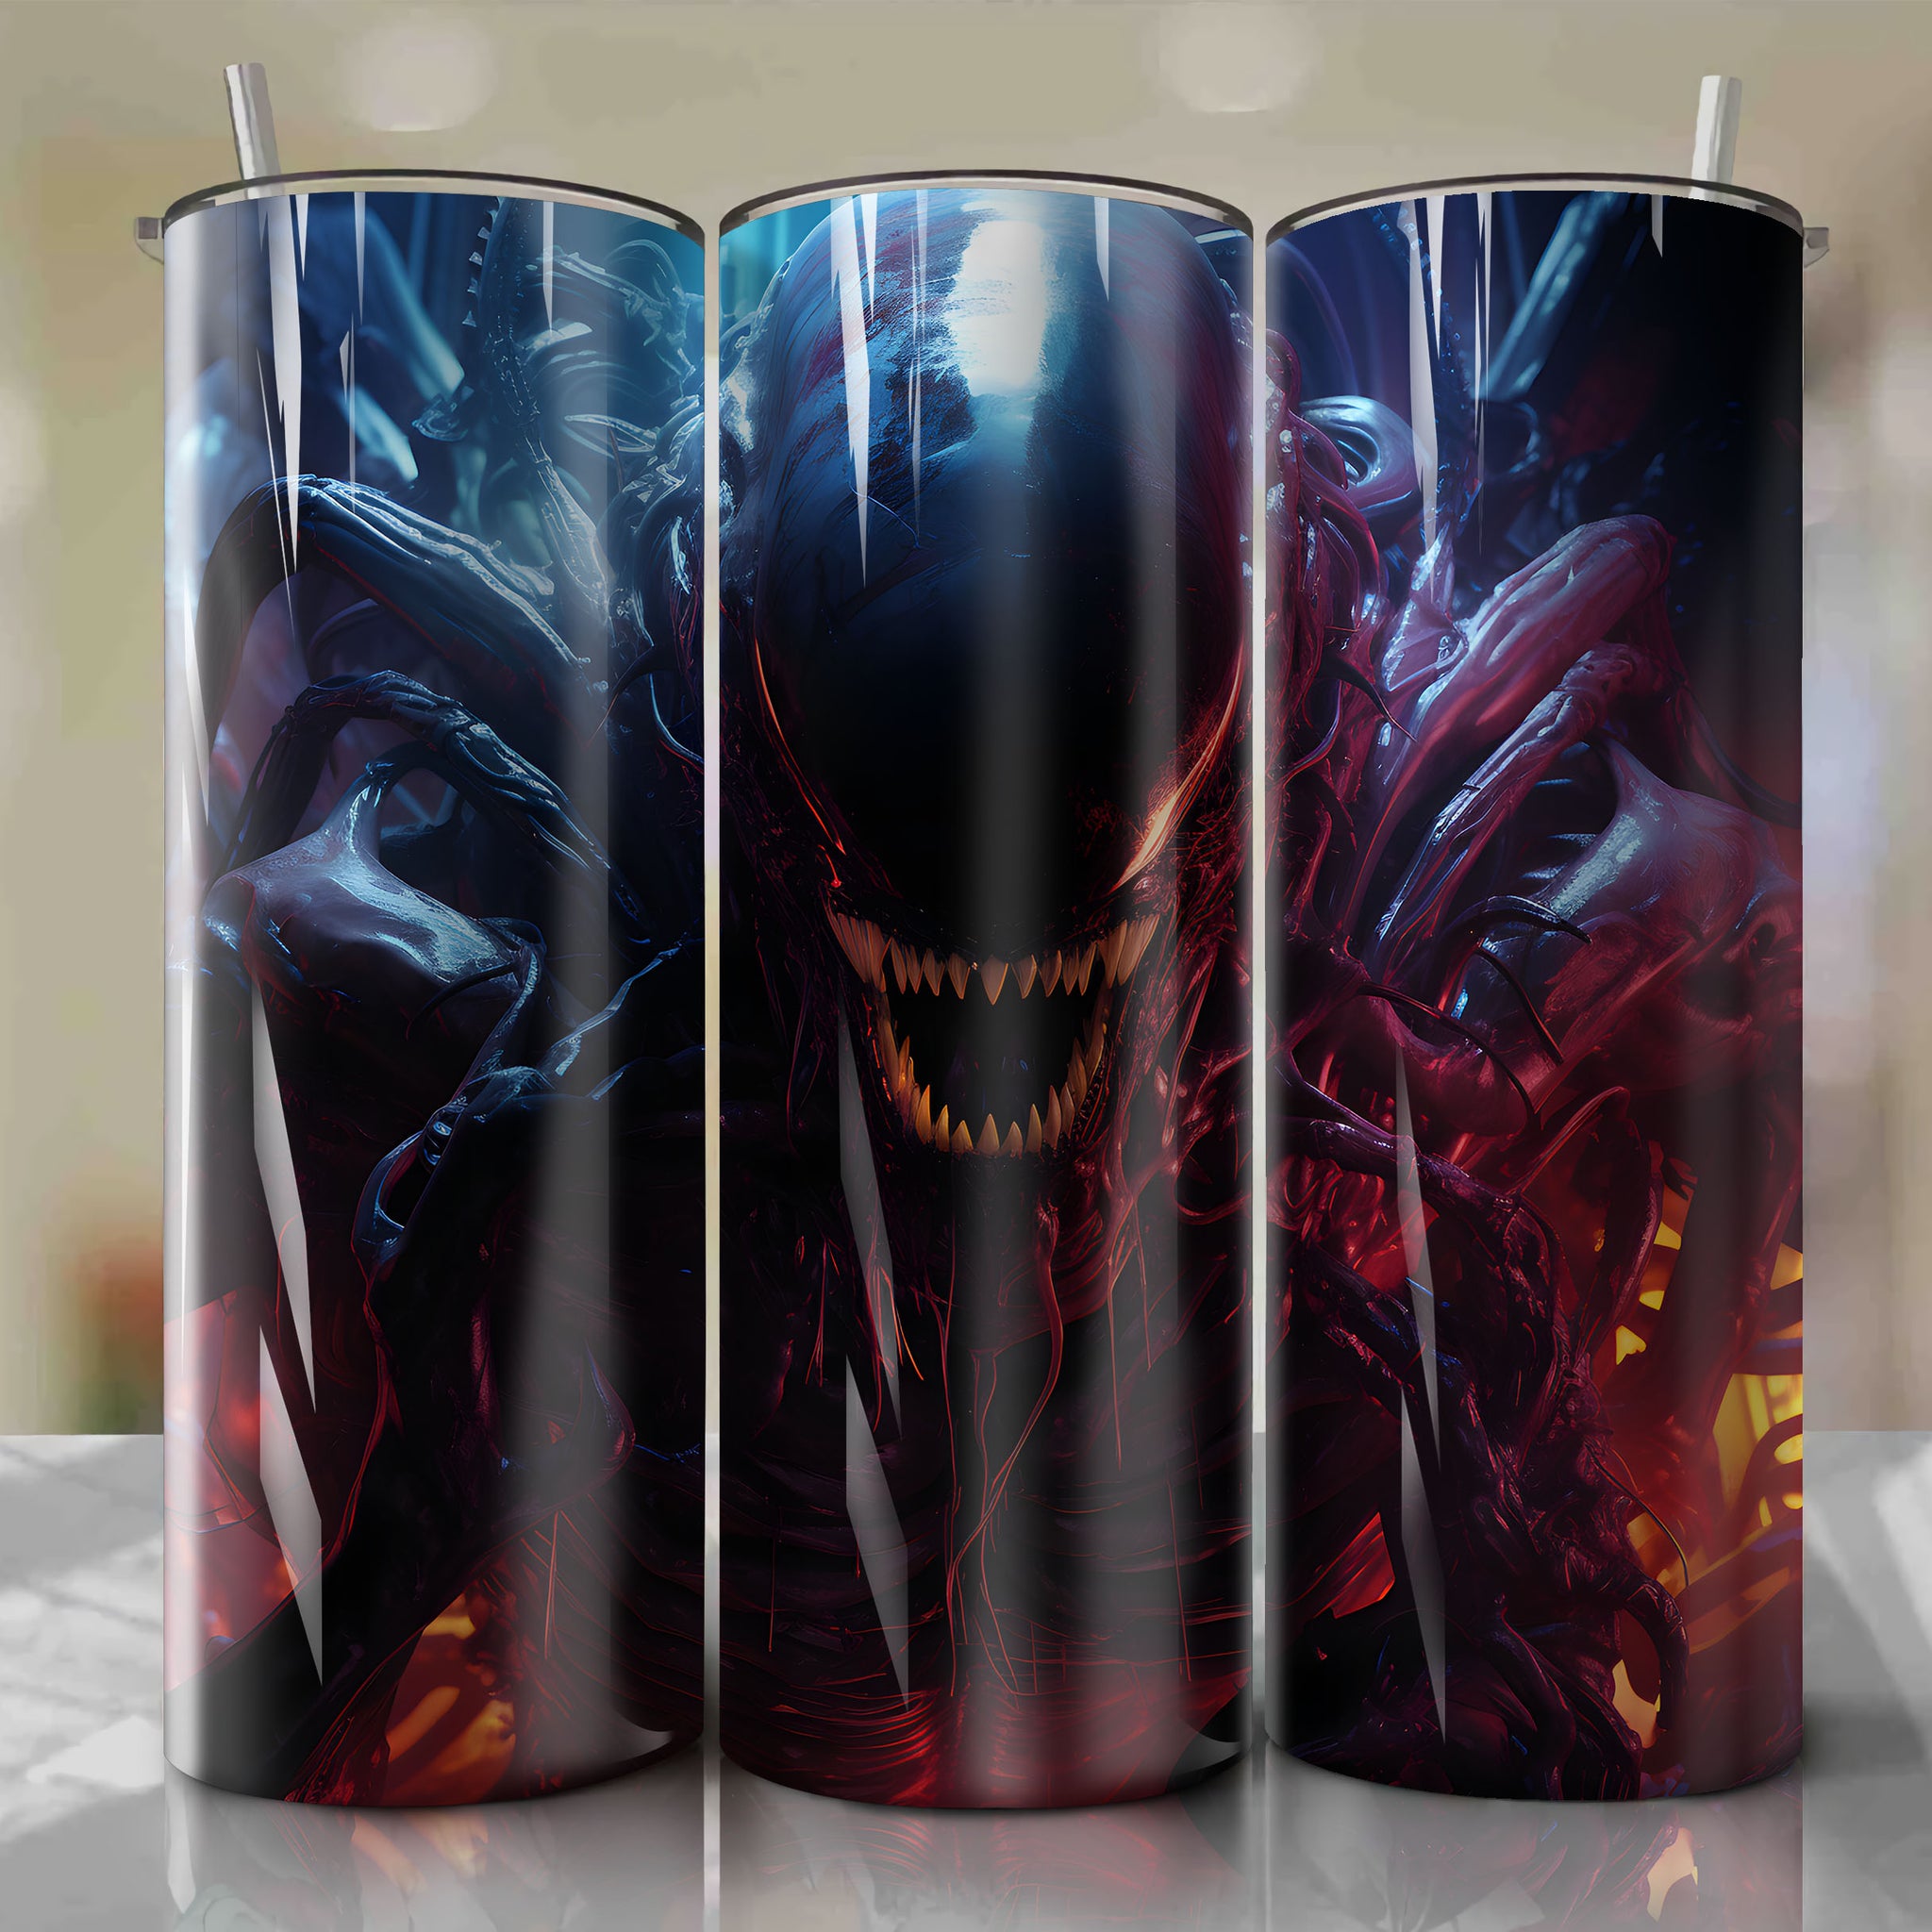 Tumbler Wrap for 20 oz Straight Tumblers - Xenomorph Alien Close-Up Image - Shadowed Biomechanical Design - Cold and Claustrophobic Atmosphere - Outer Space Theme